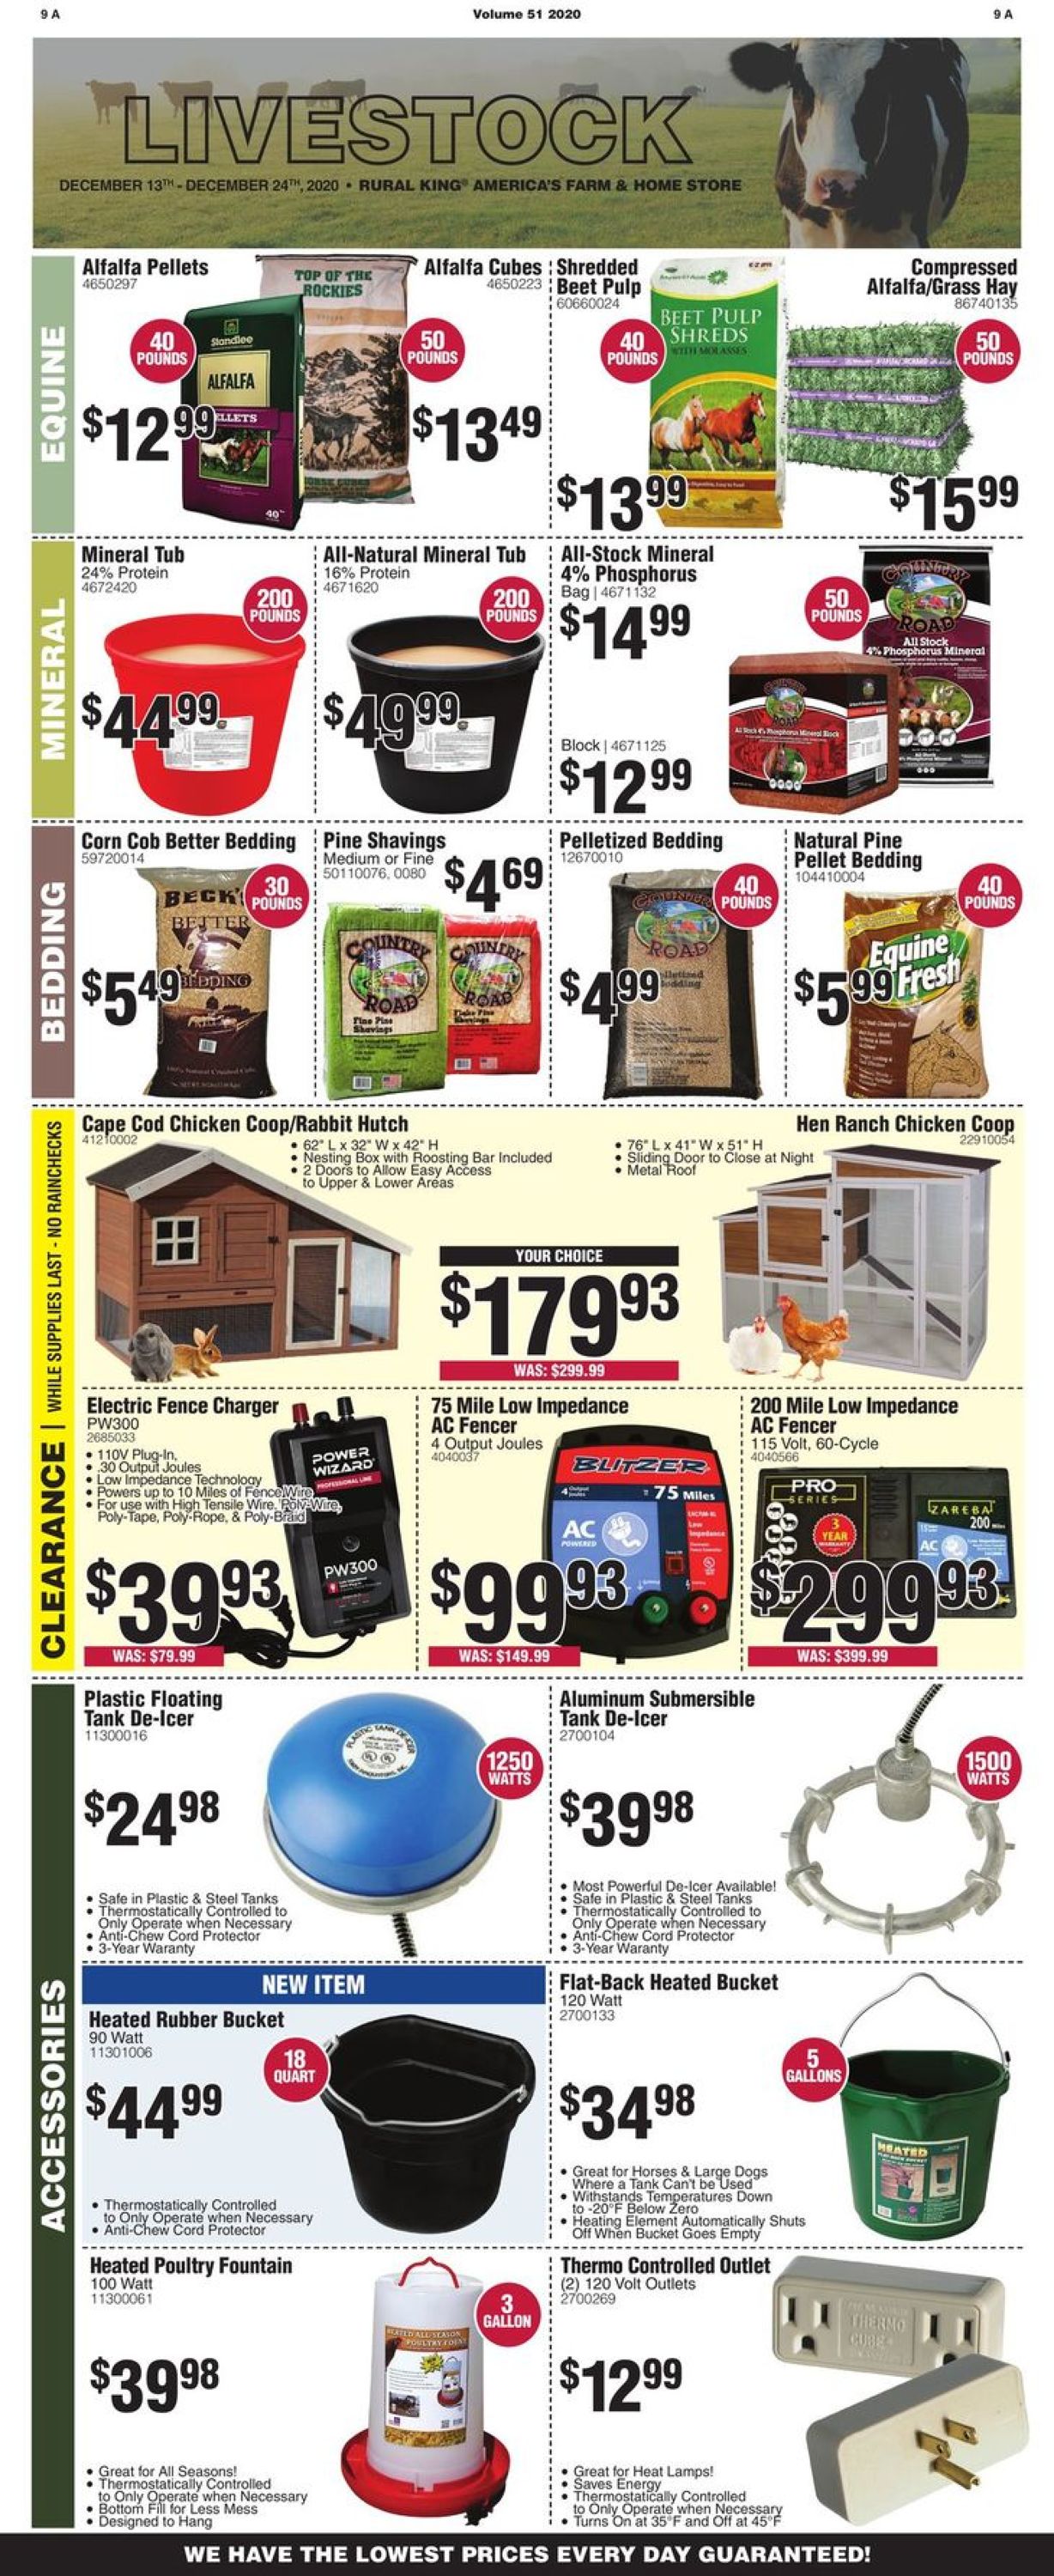 Catalogue Rural King Last minute Christmas Gifts 2020 from 12/13/2020